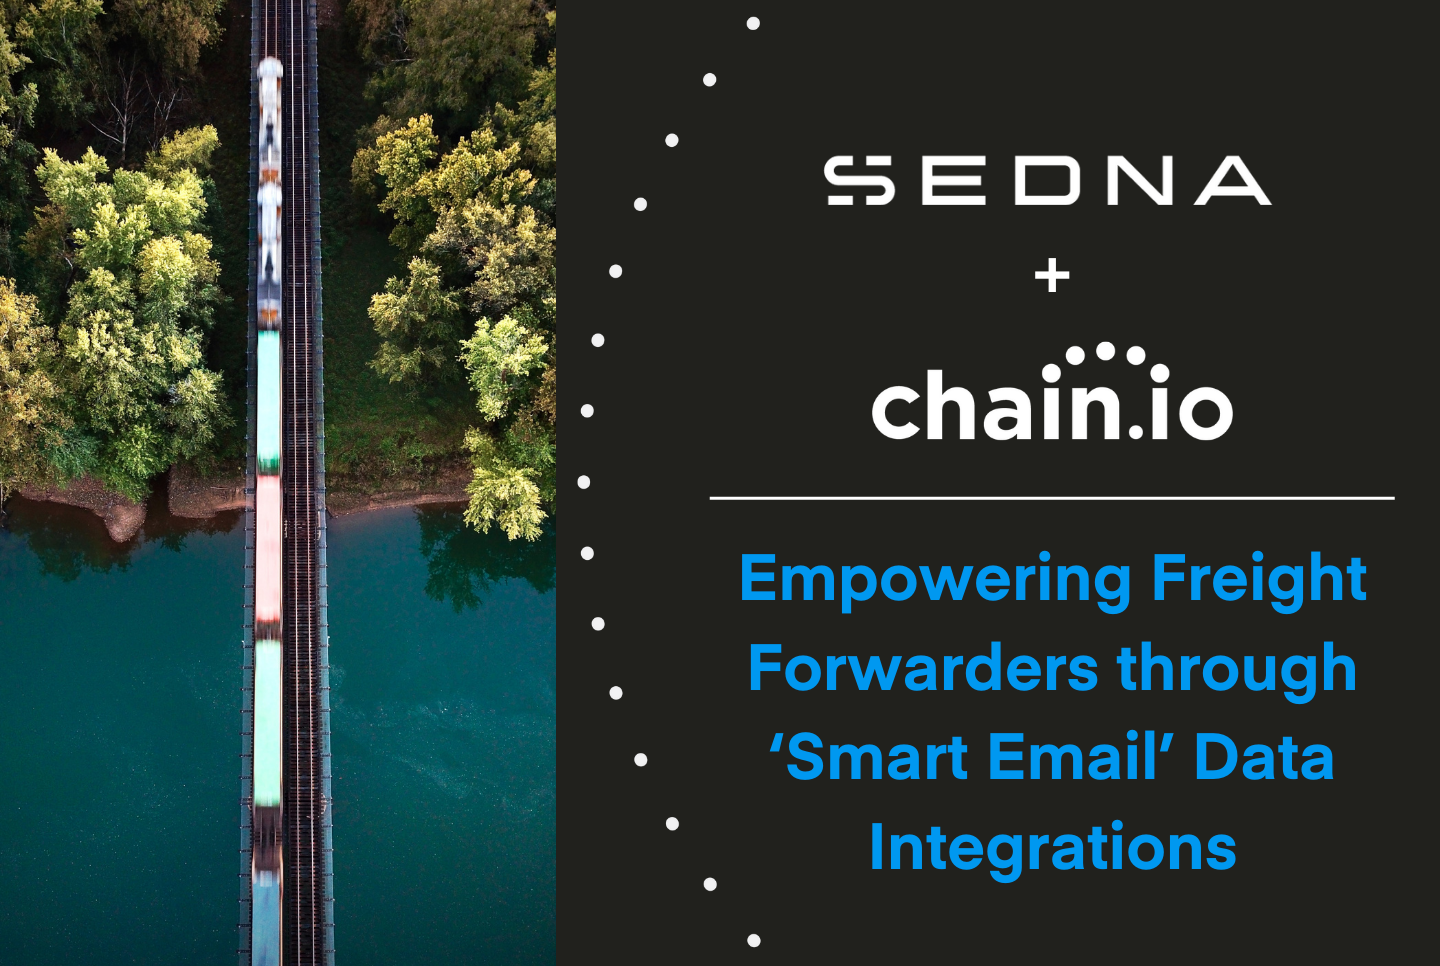 The integration of SEDNA into our network of partners will expand freight forwarders’ communication, document management, and business intelligence capabilities